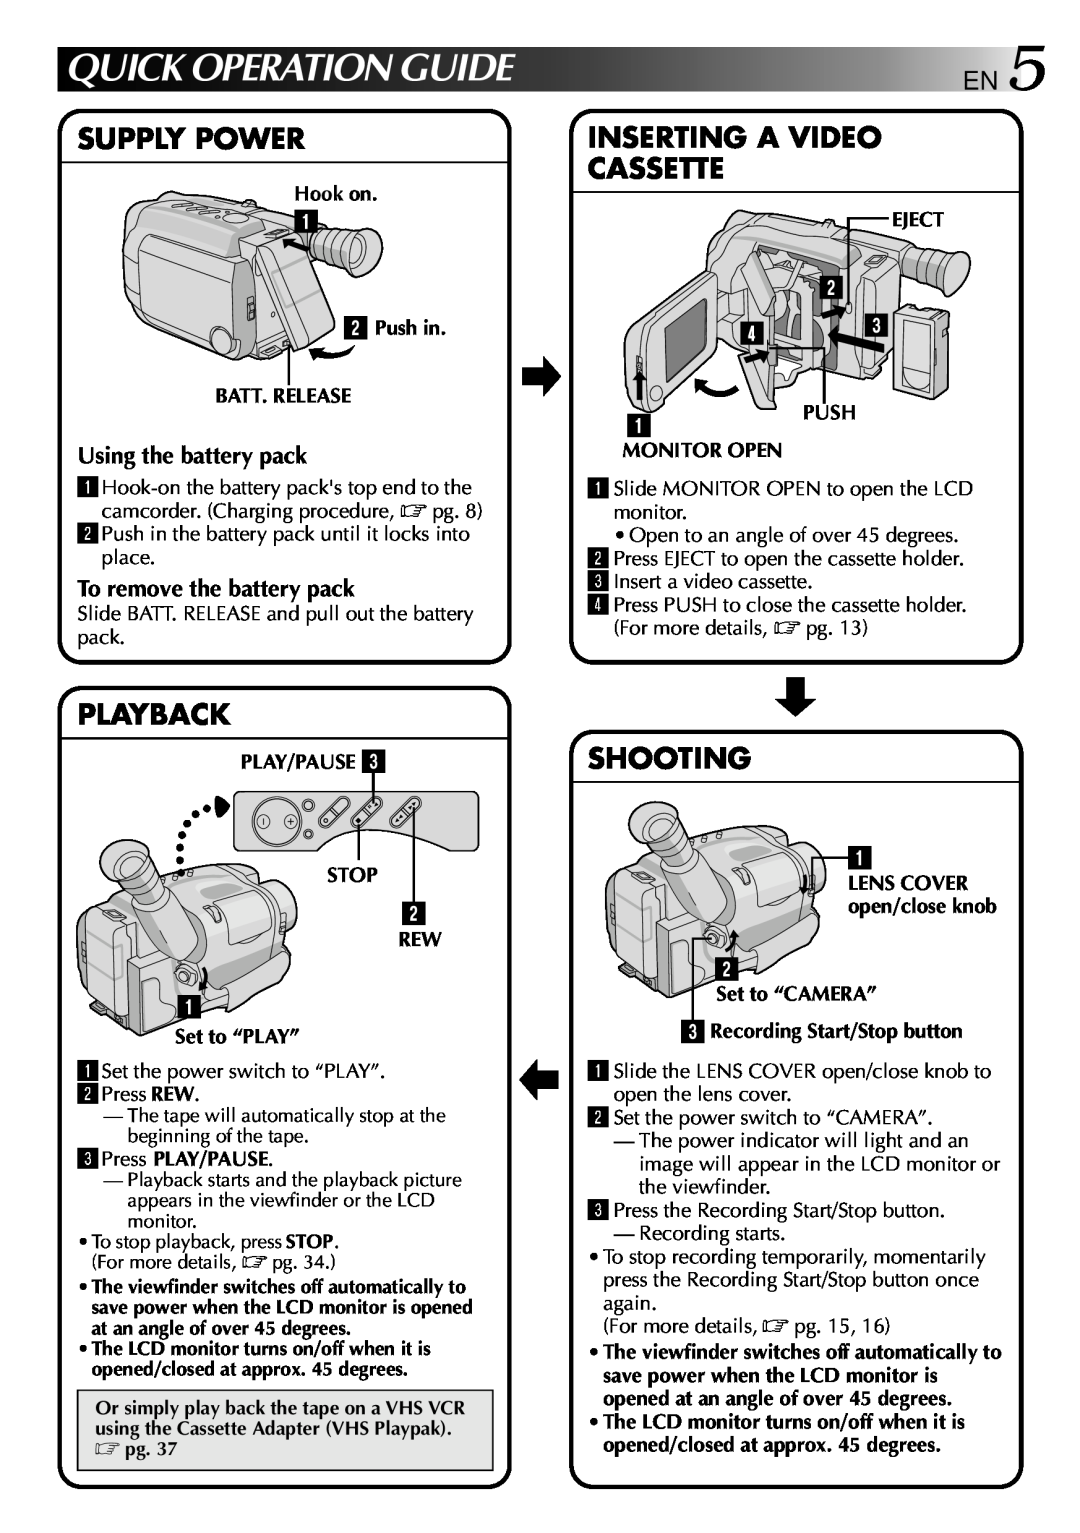 JVC GR-AXM70 Quick Operation Guide, Supply Power, Inserting A Video Cassette, Playback, Shooting, Using the battery pack 